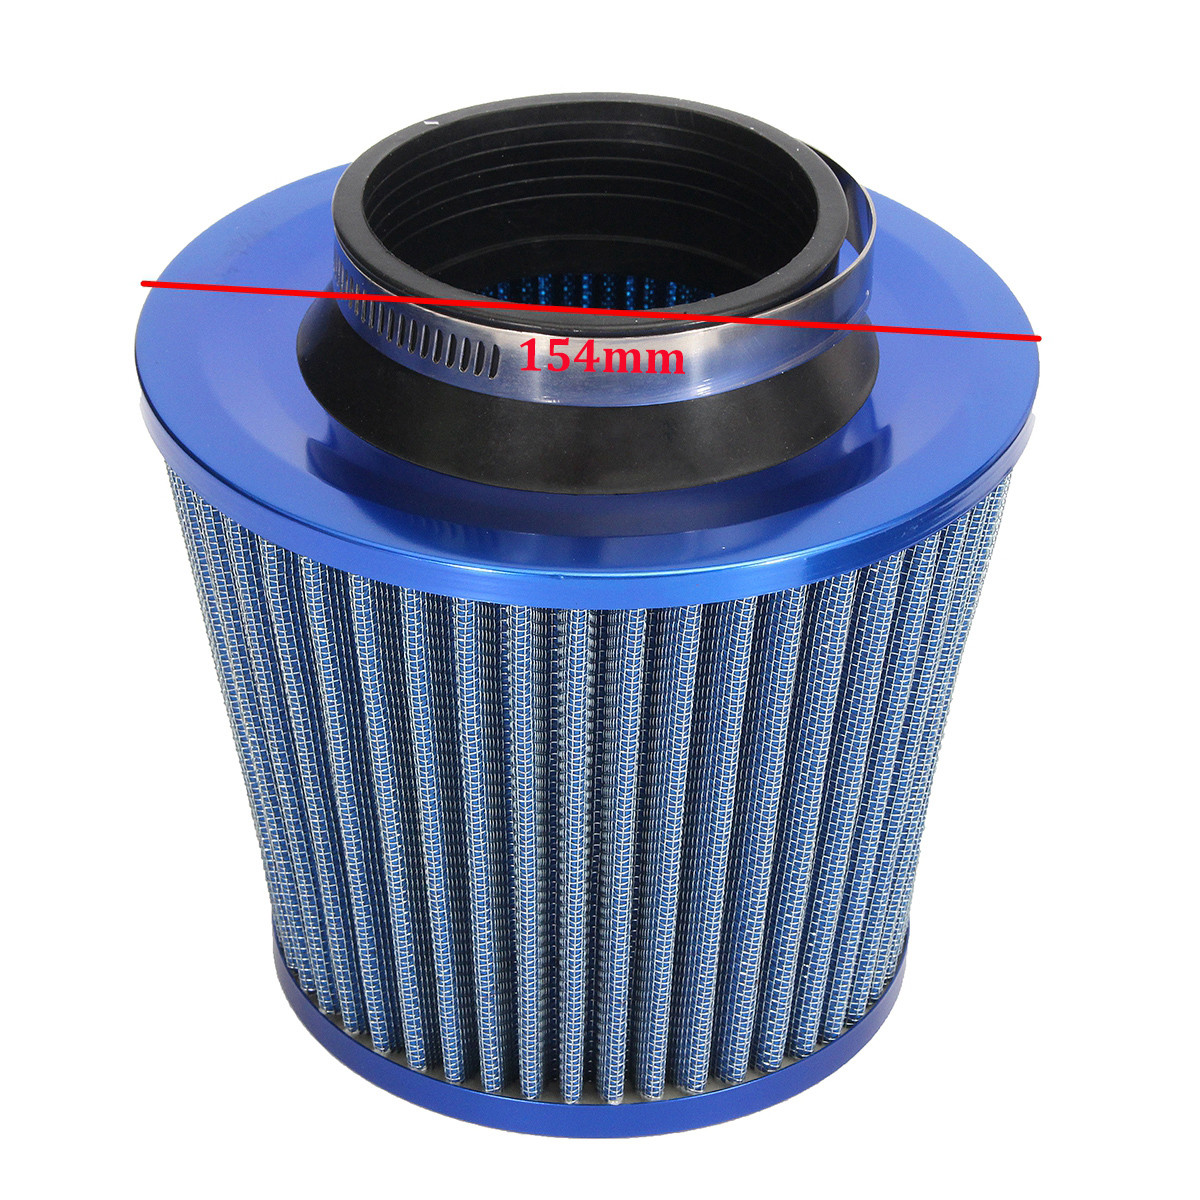 3-Inch-75mm-Car-Cold-Air-Intake-System-Turbo-Induction-Pipe-Tube-and-Cone-Filter-1370544